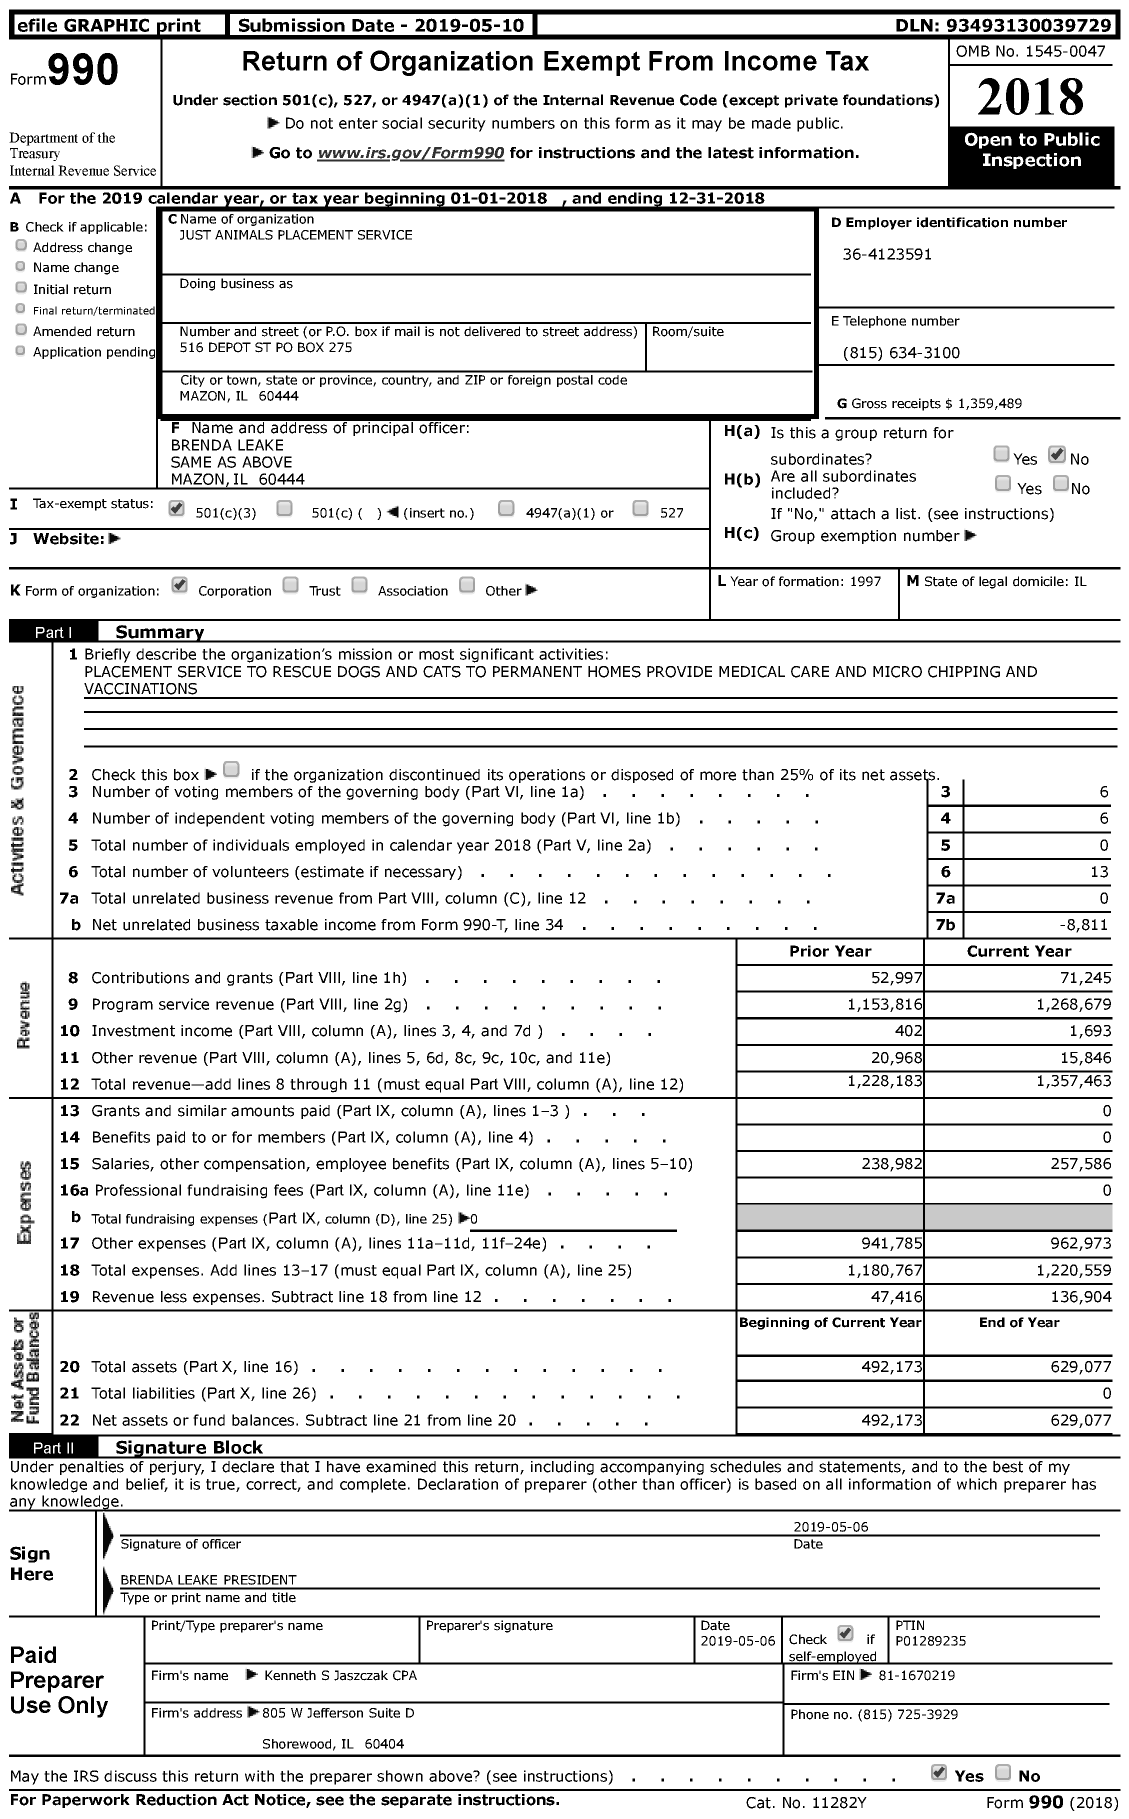 Image of first page of 2018 Form 990 for Just Animals Placement Service